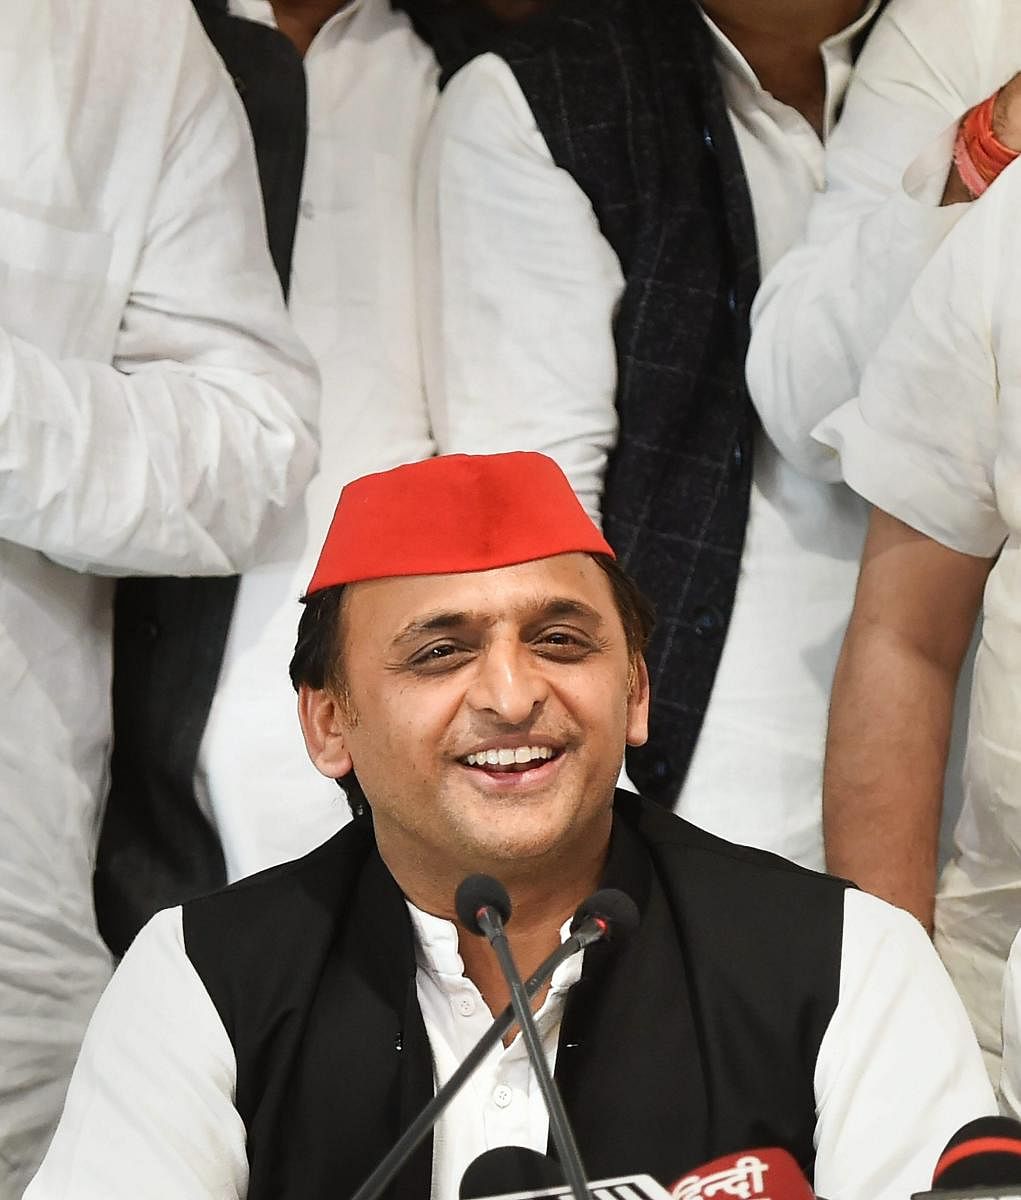 Akhilesh Yadav had, by agreeing to let his party nominee contest on the RLD symbol, ensured that the SP would get the support of the Jat voters.